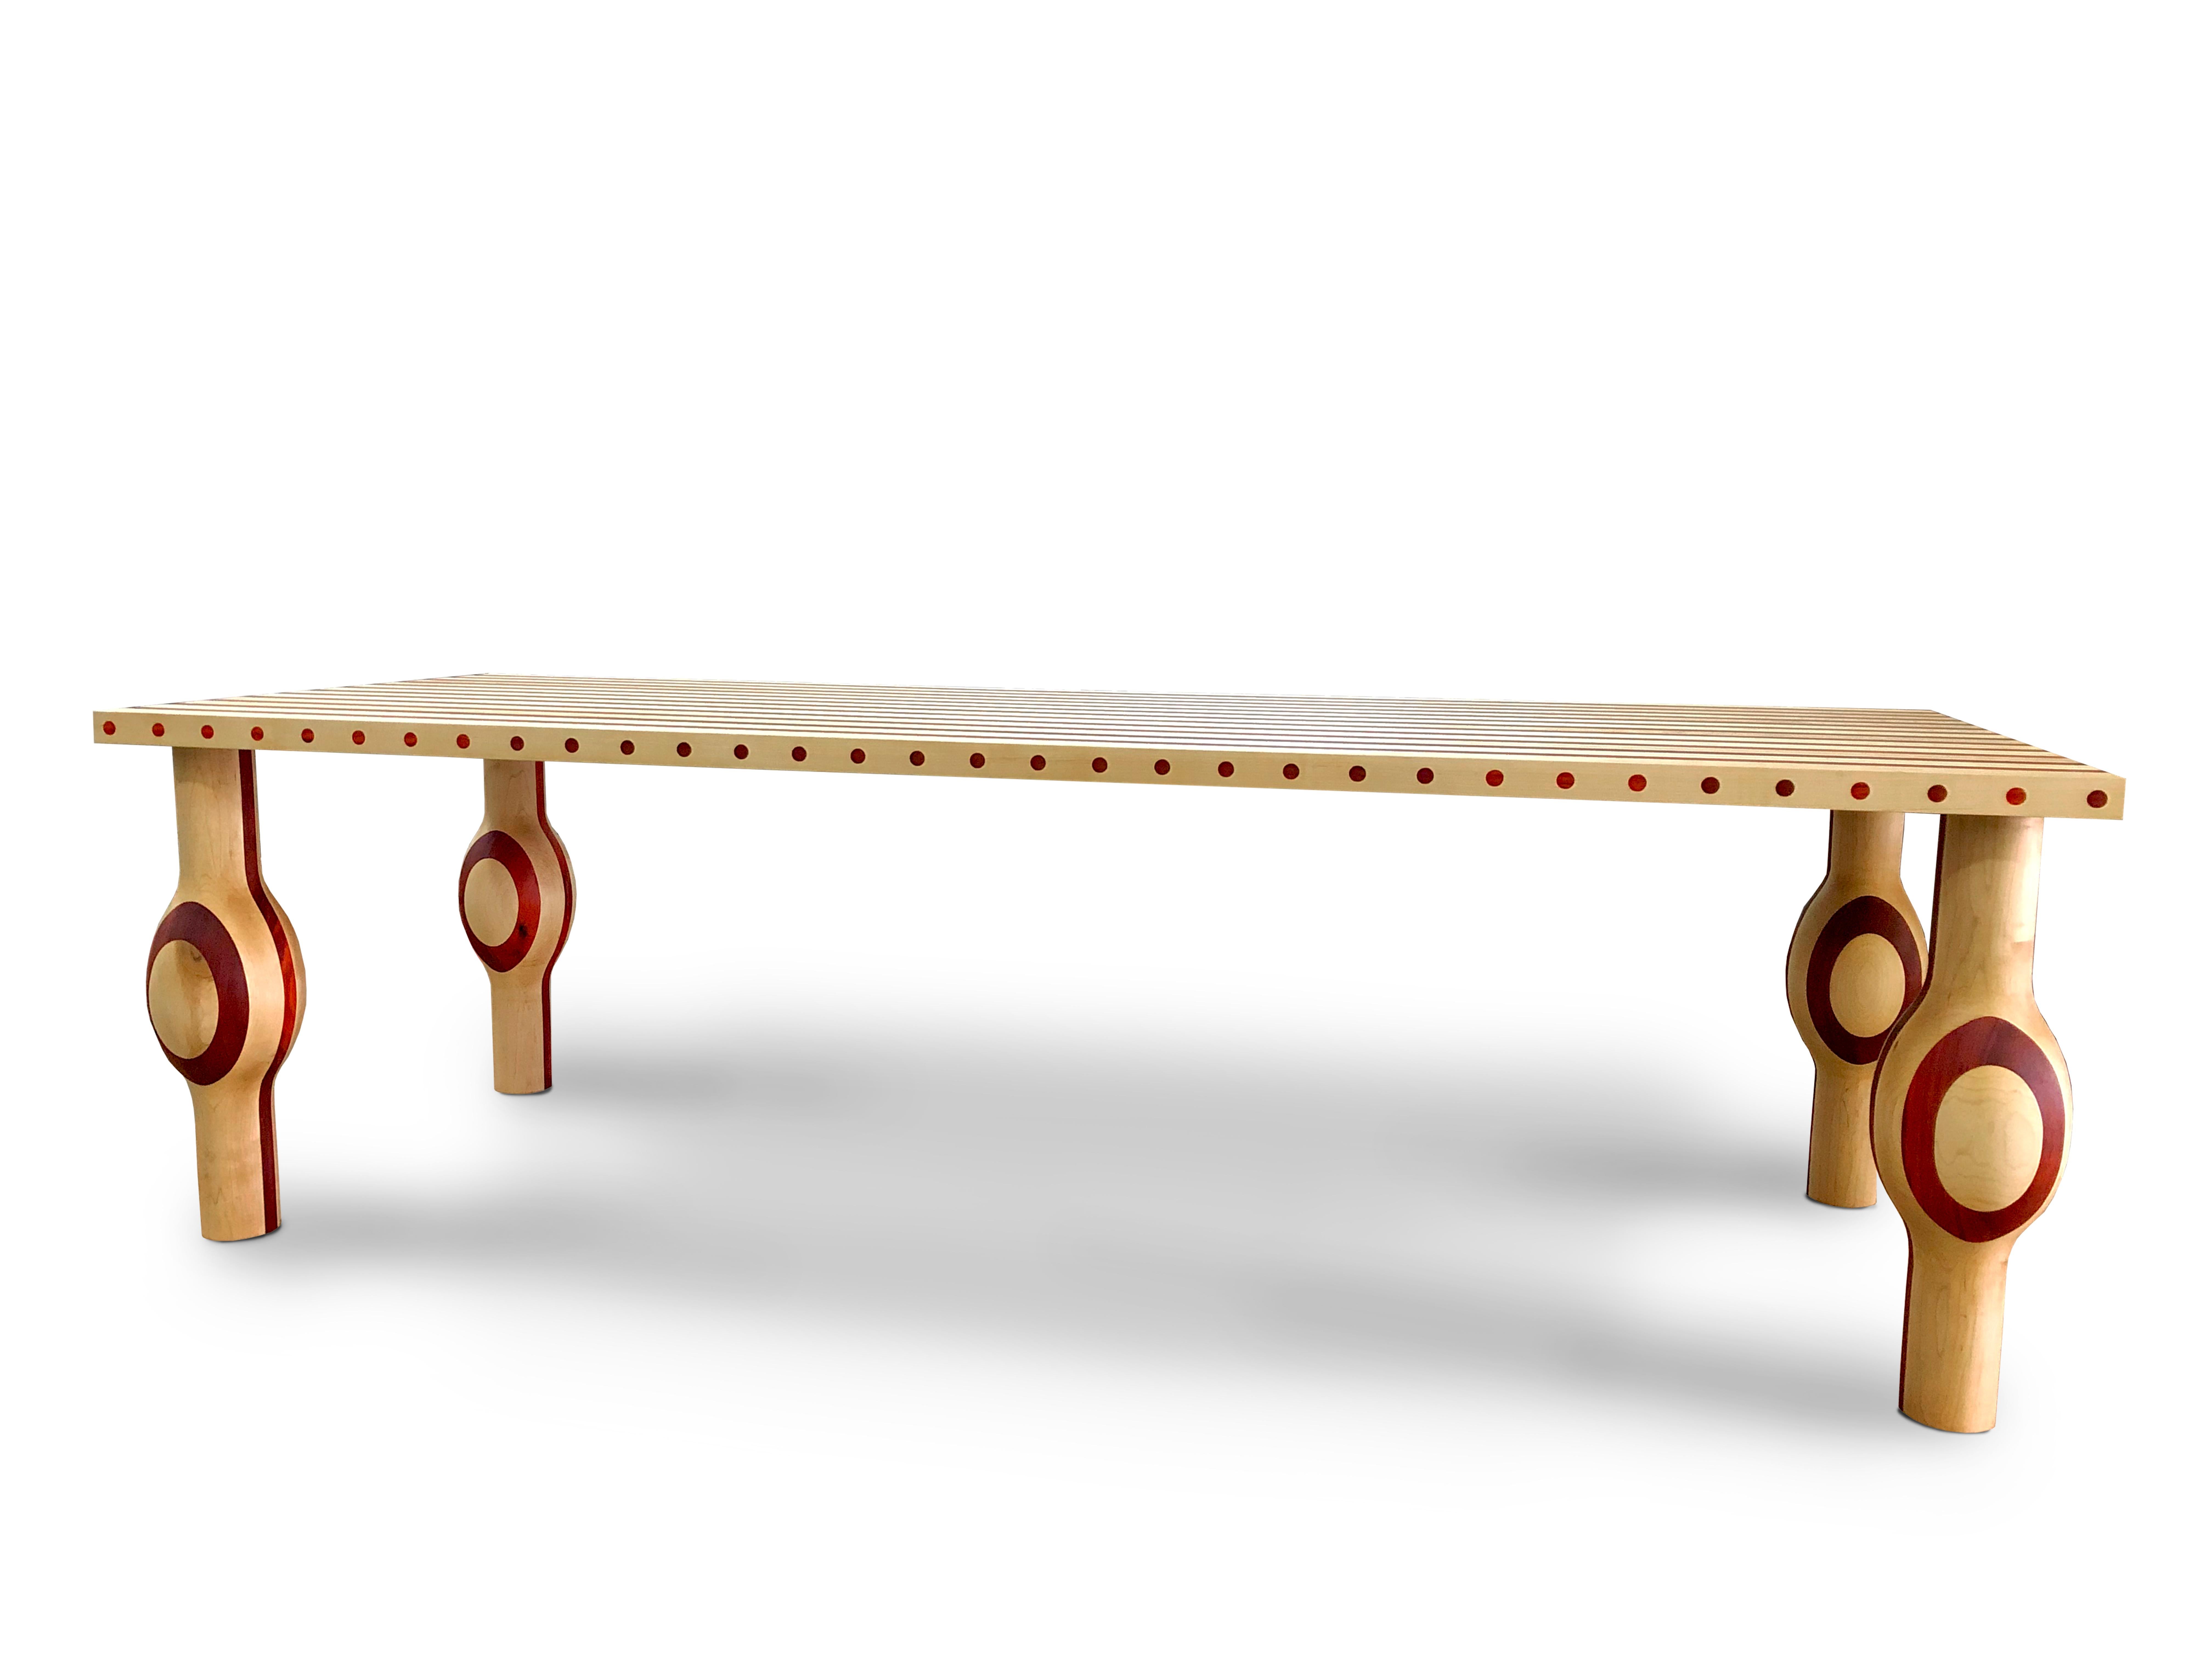 Part of the Striped Series collection by Troy Smith from Troy Smith Studio

Solid woods maple and Padauk come together to form a beautifully shaped and proportioned dining table. The table top and legs are solid wood, the table top is 2